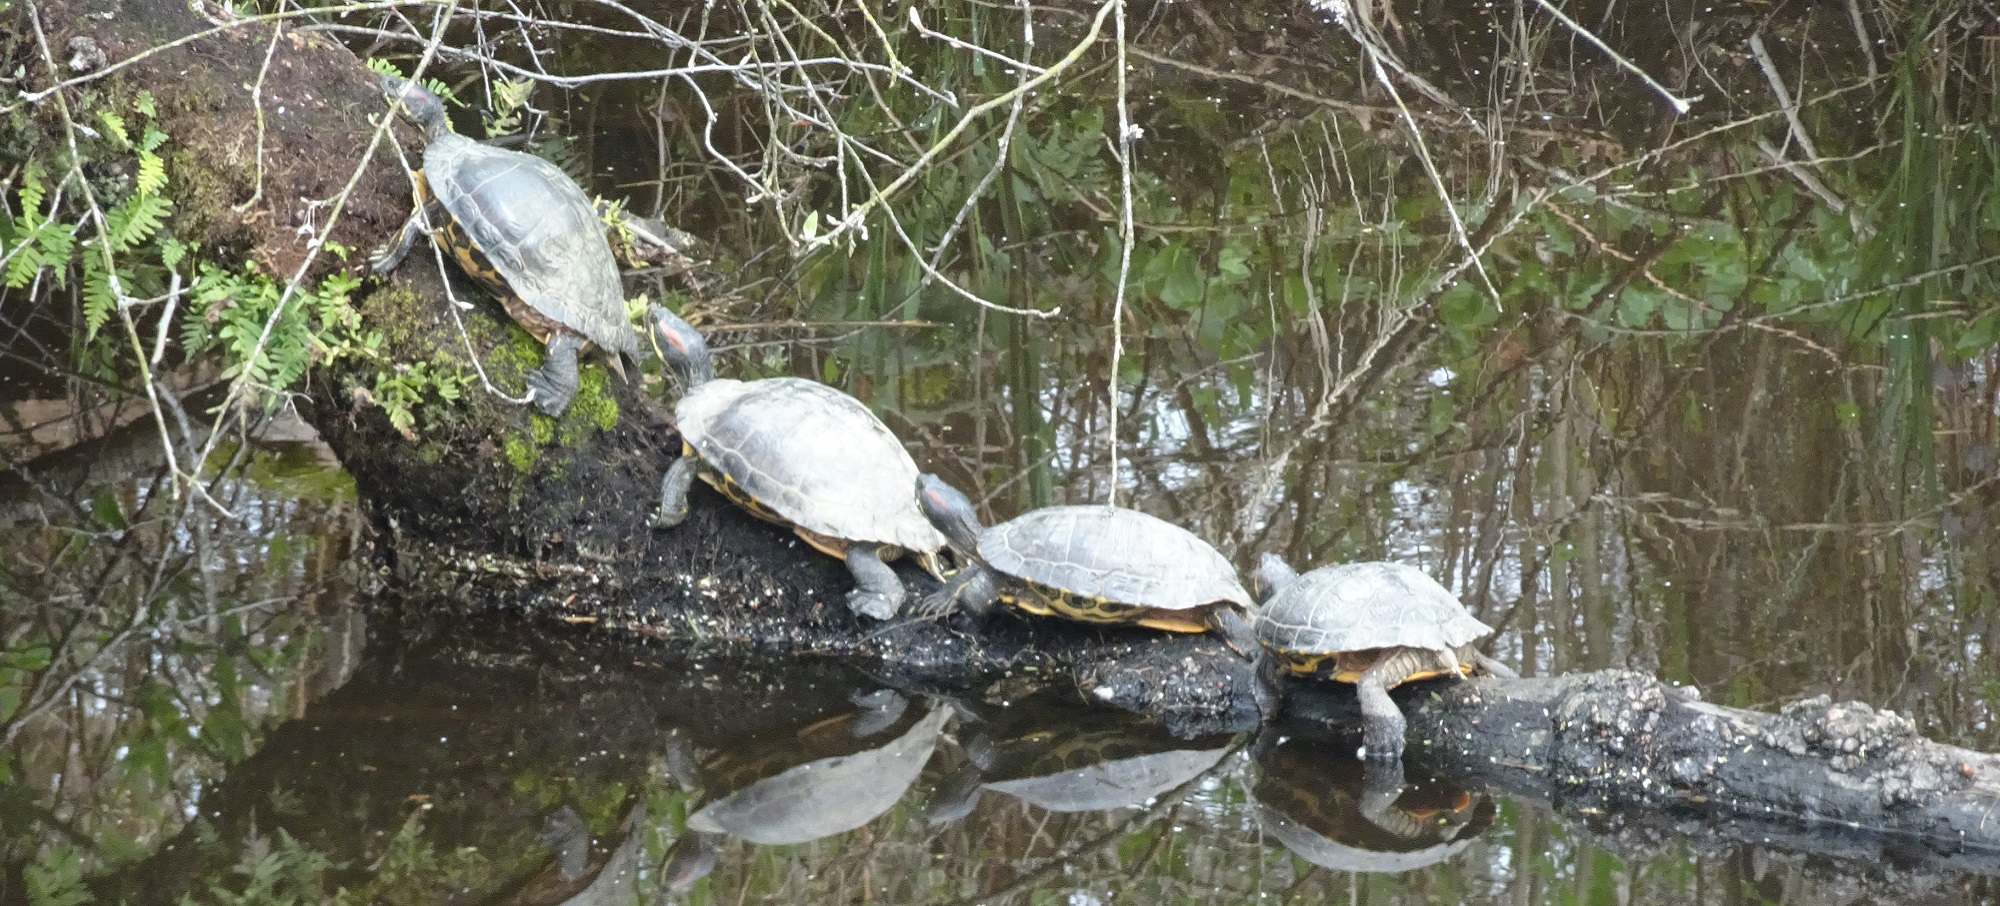 A traffic jam of turtles at the Deboville Slough in Coquitlam, seen along the Traboulay Trail.